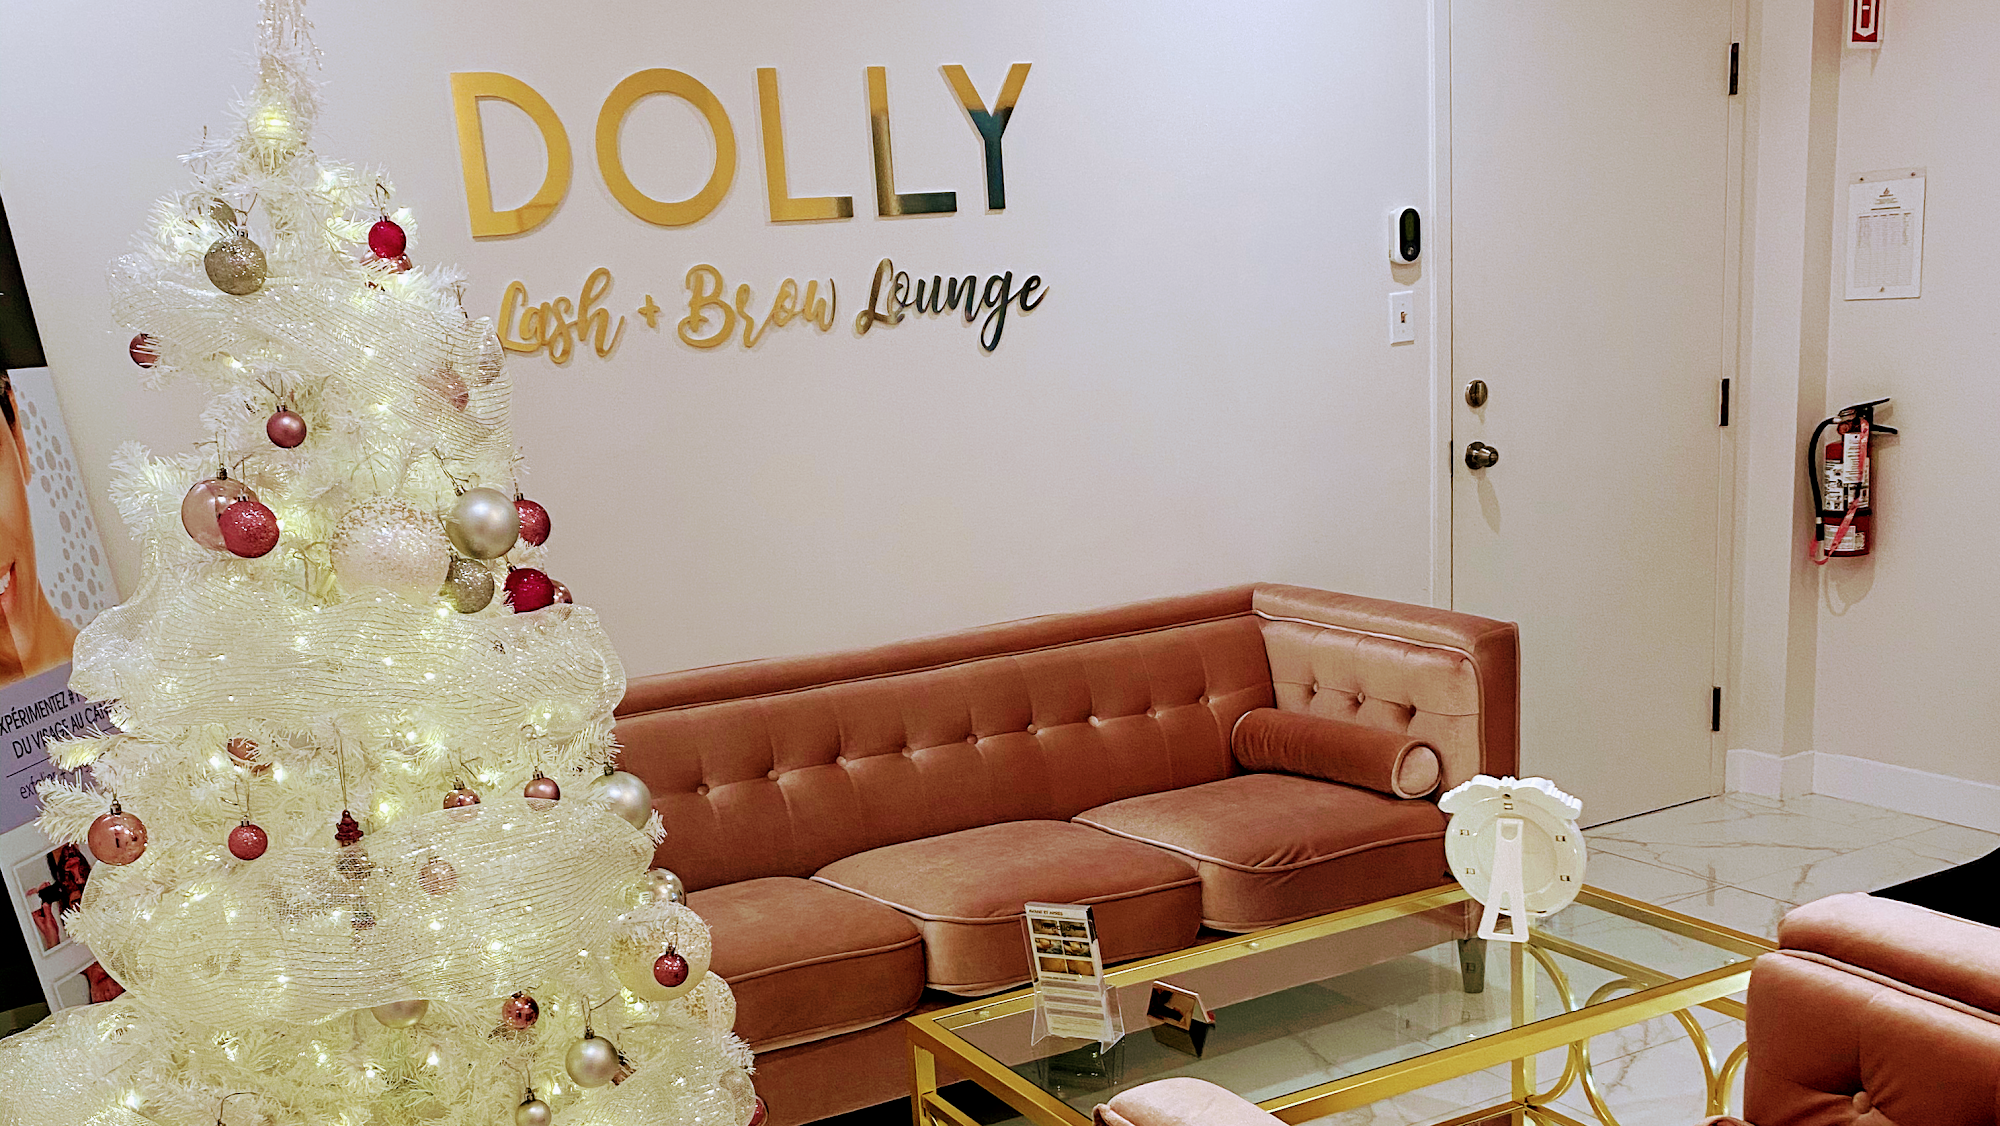 Dolly Lash+Brow Lounge- Nails-Oxygeneo-Laser-Tattoo Removal